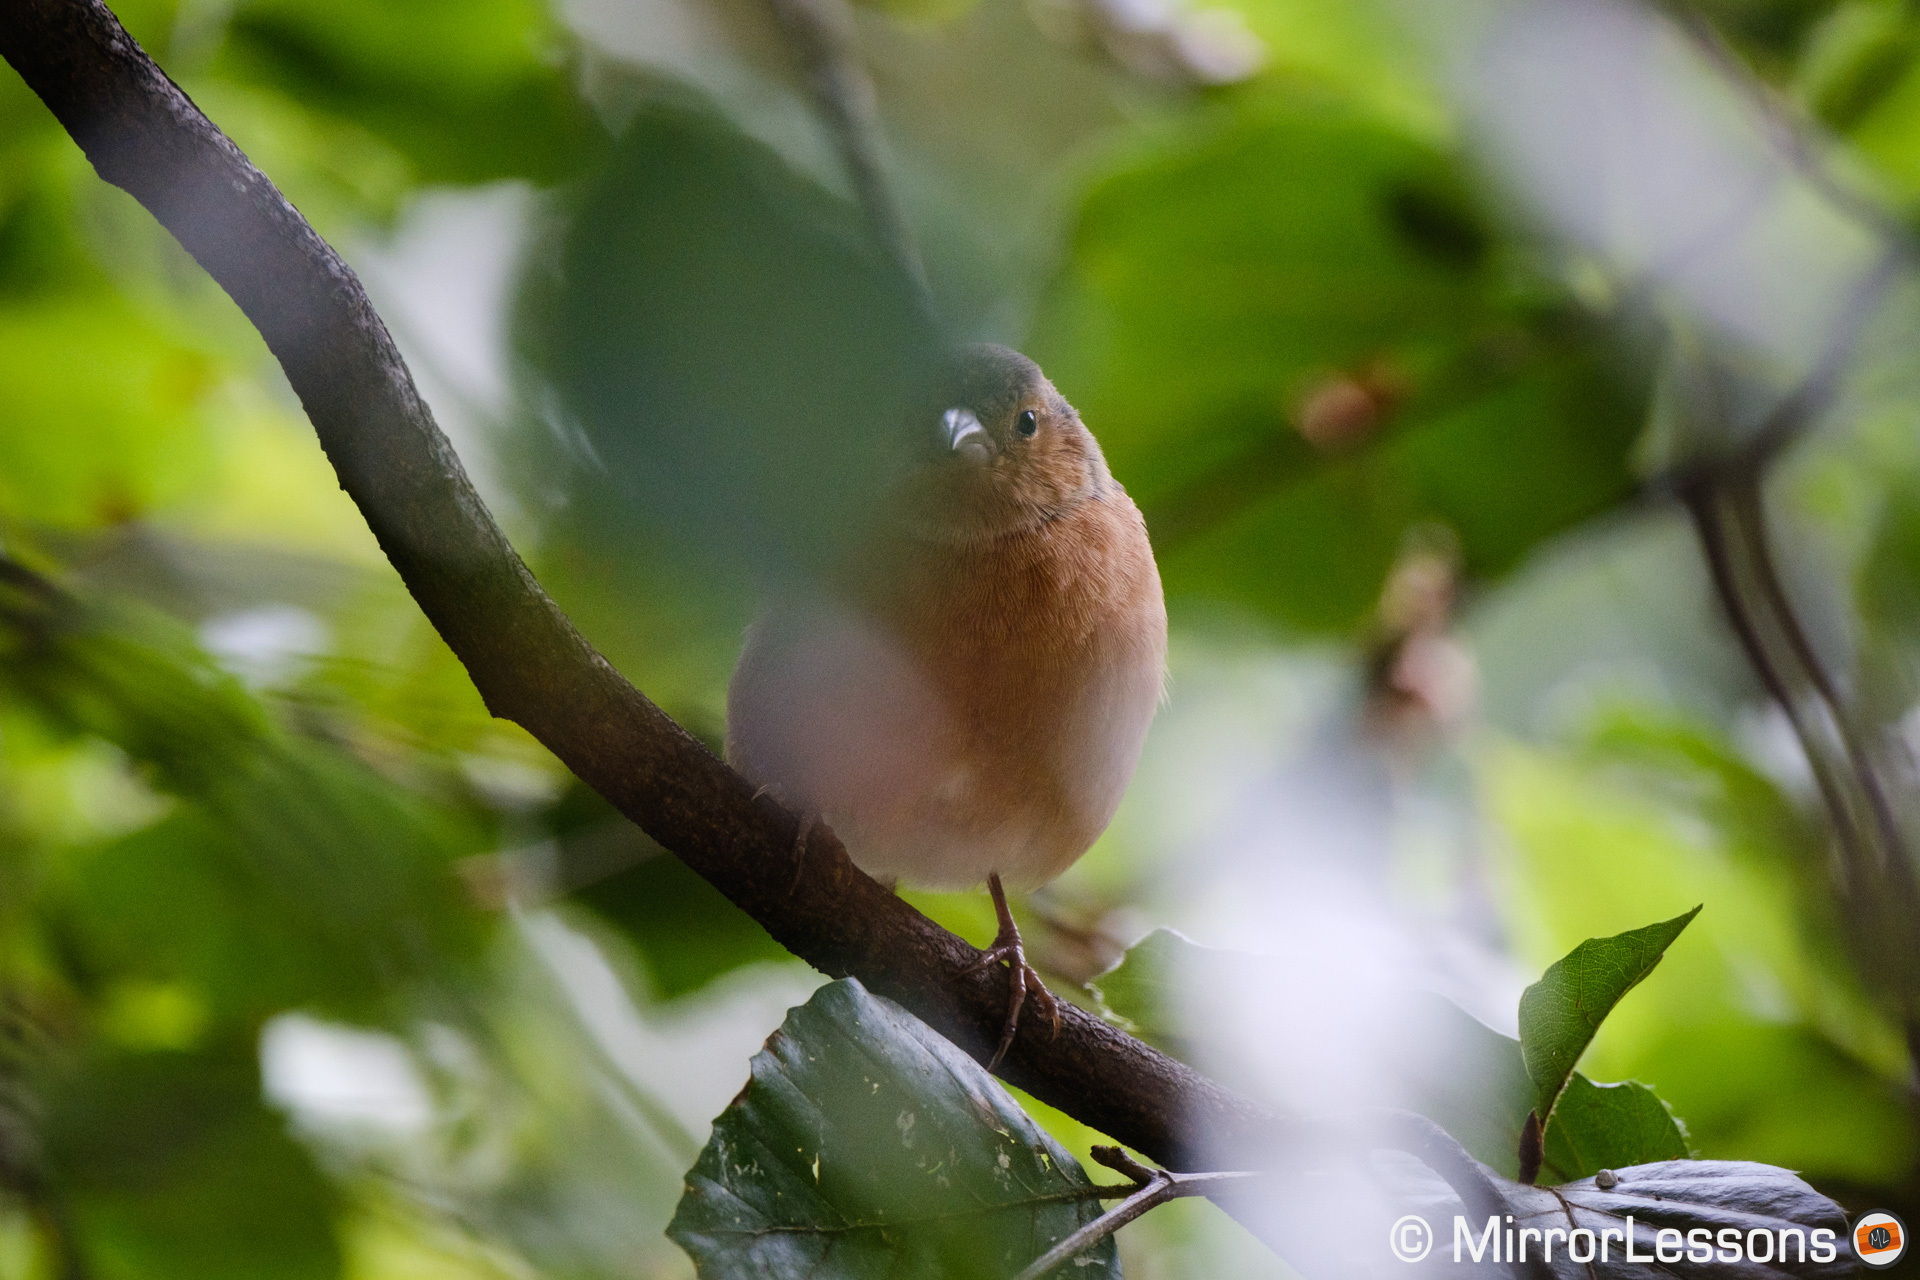 Chaffinch on a branch, surrounded by green leaves